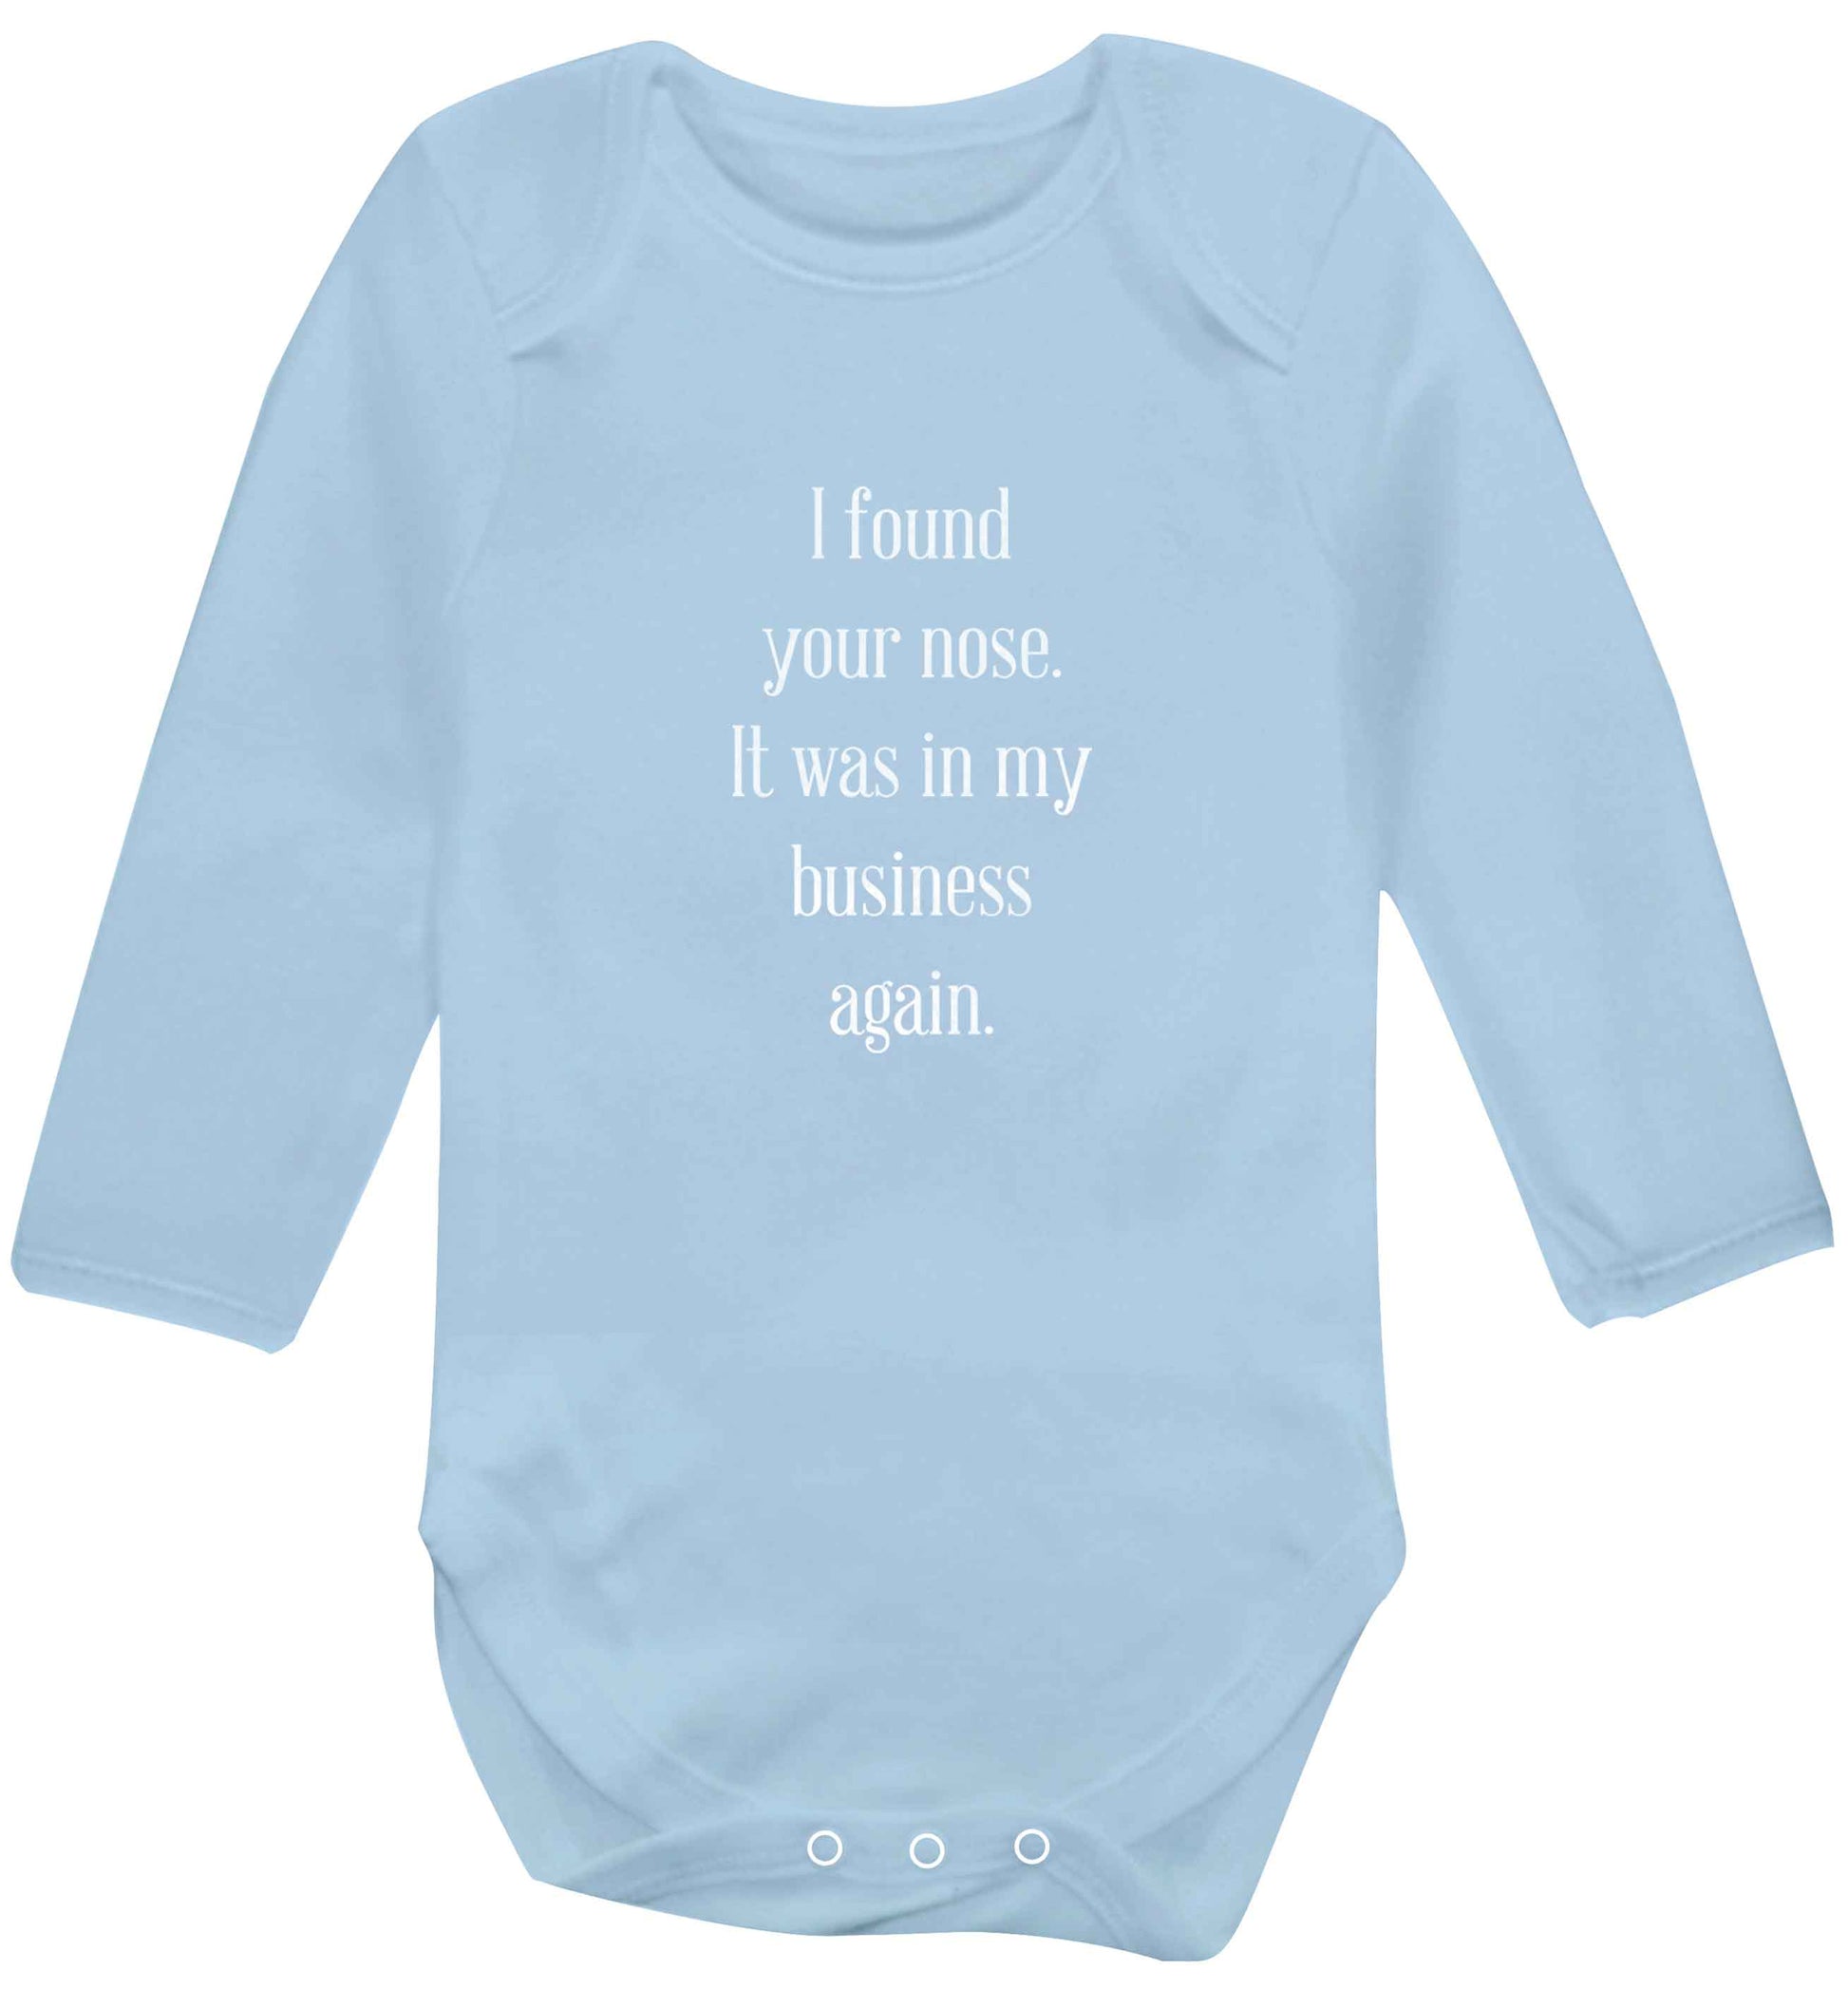 I found your nose it was in my business again baby vest long sleeved pale blue 6-12 months